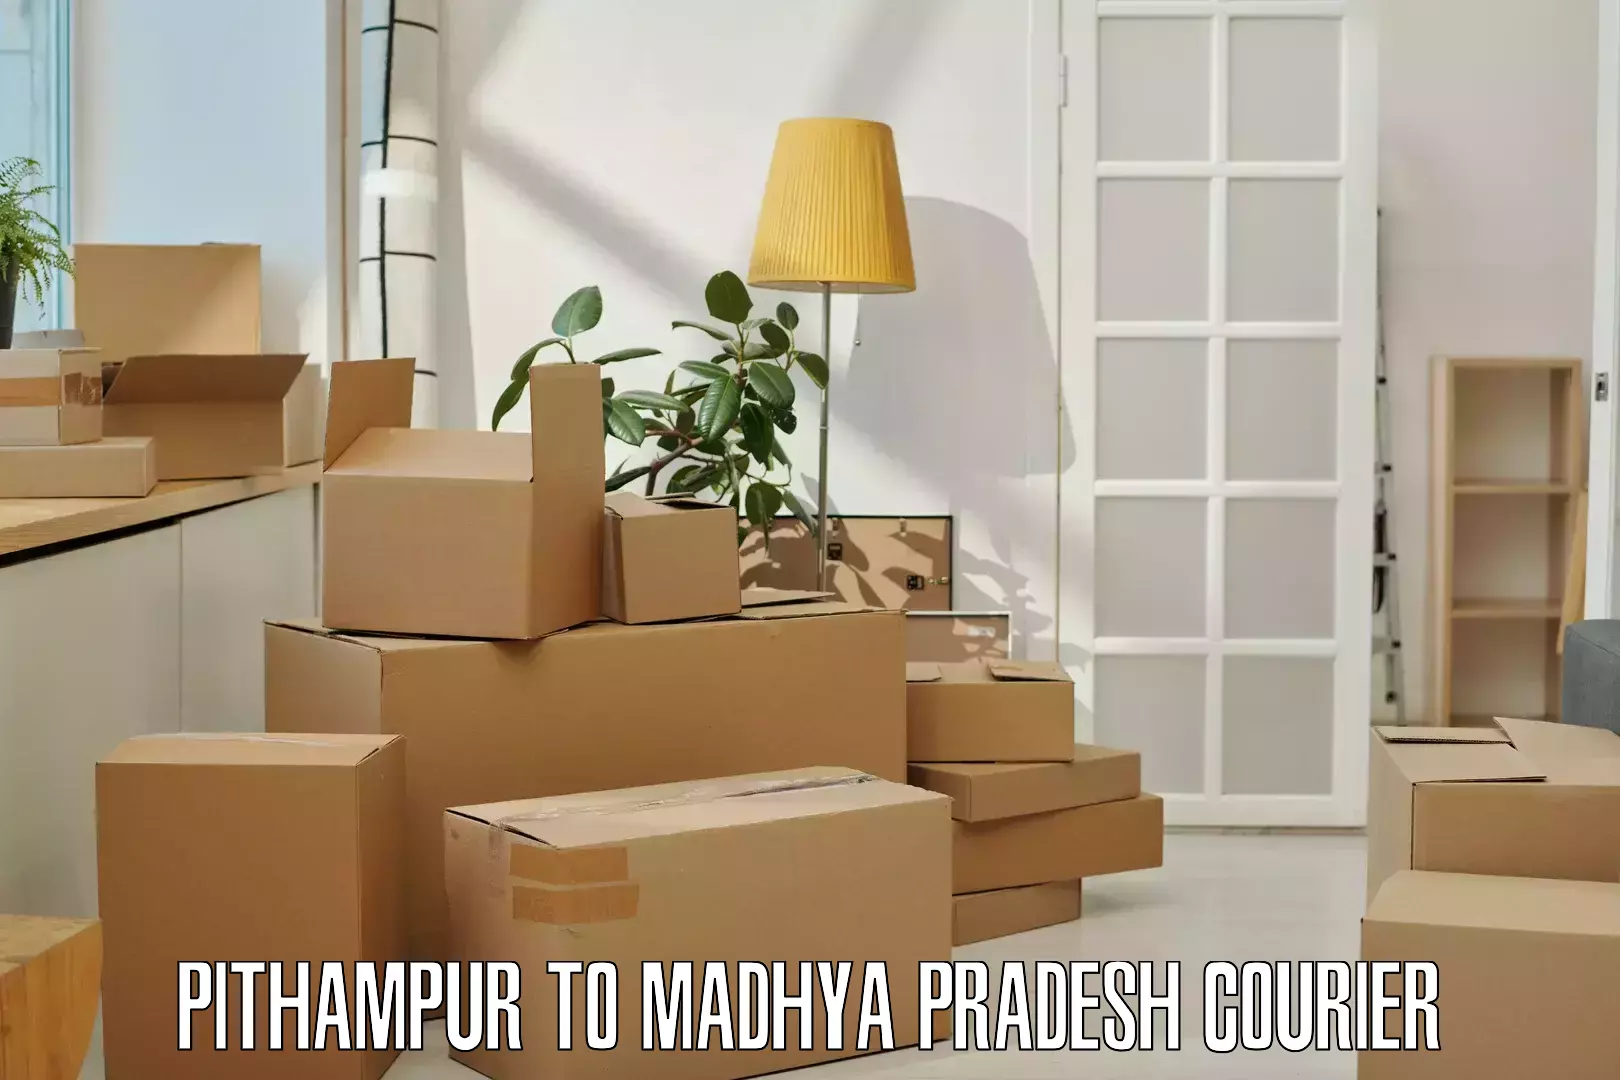 Multi-service courier options Pithampur to IIIT Bhopal